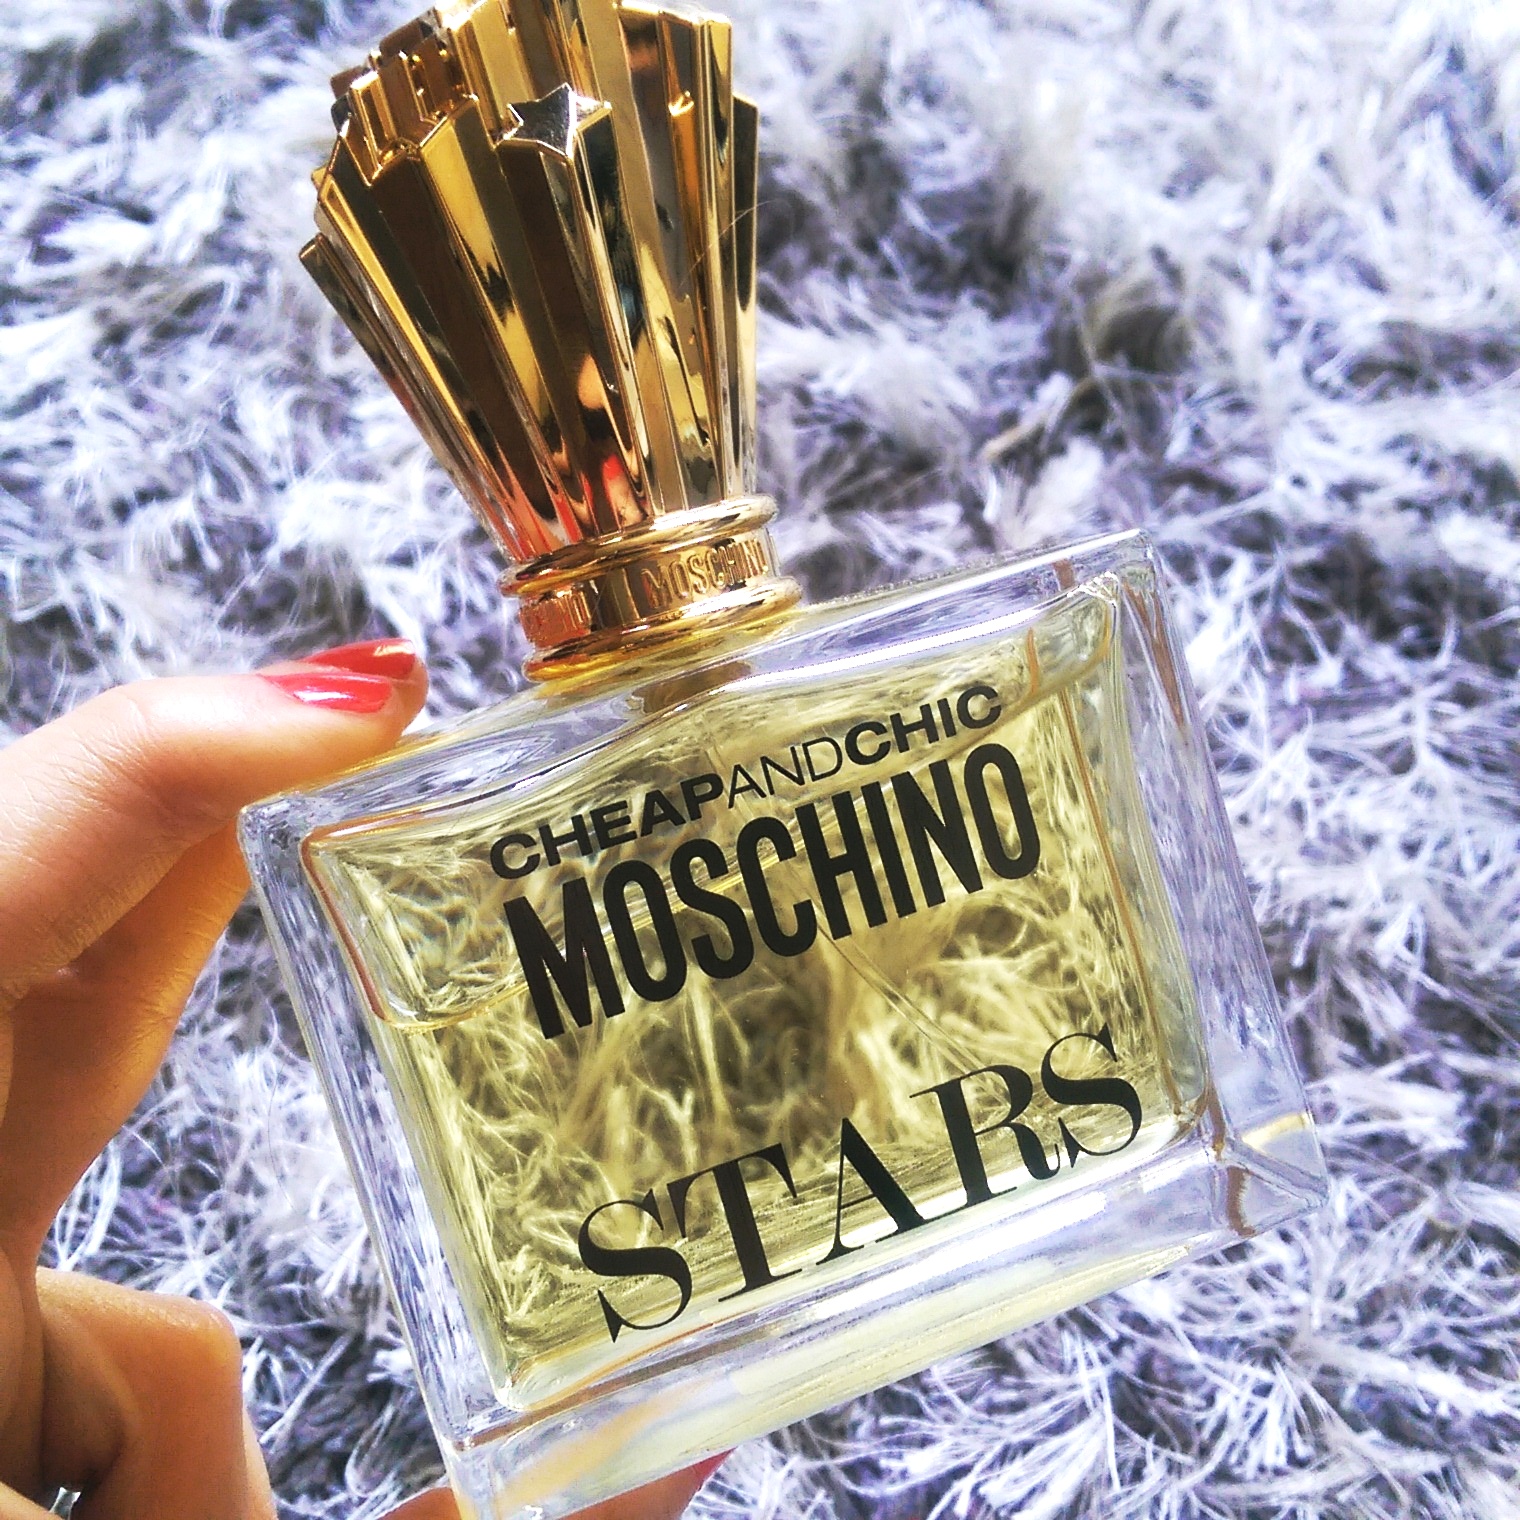 New fragrance reviews: Victor & Rolf Flowerbomb Extreme, Moschino Stars,  Karl Lagerfeld Private Klub, Elizabeth Arden Always Red and Gucci Bamboo –  Lipgloss is my Life